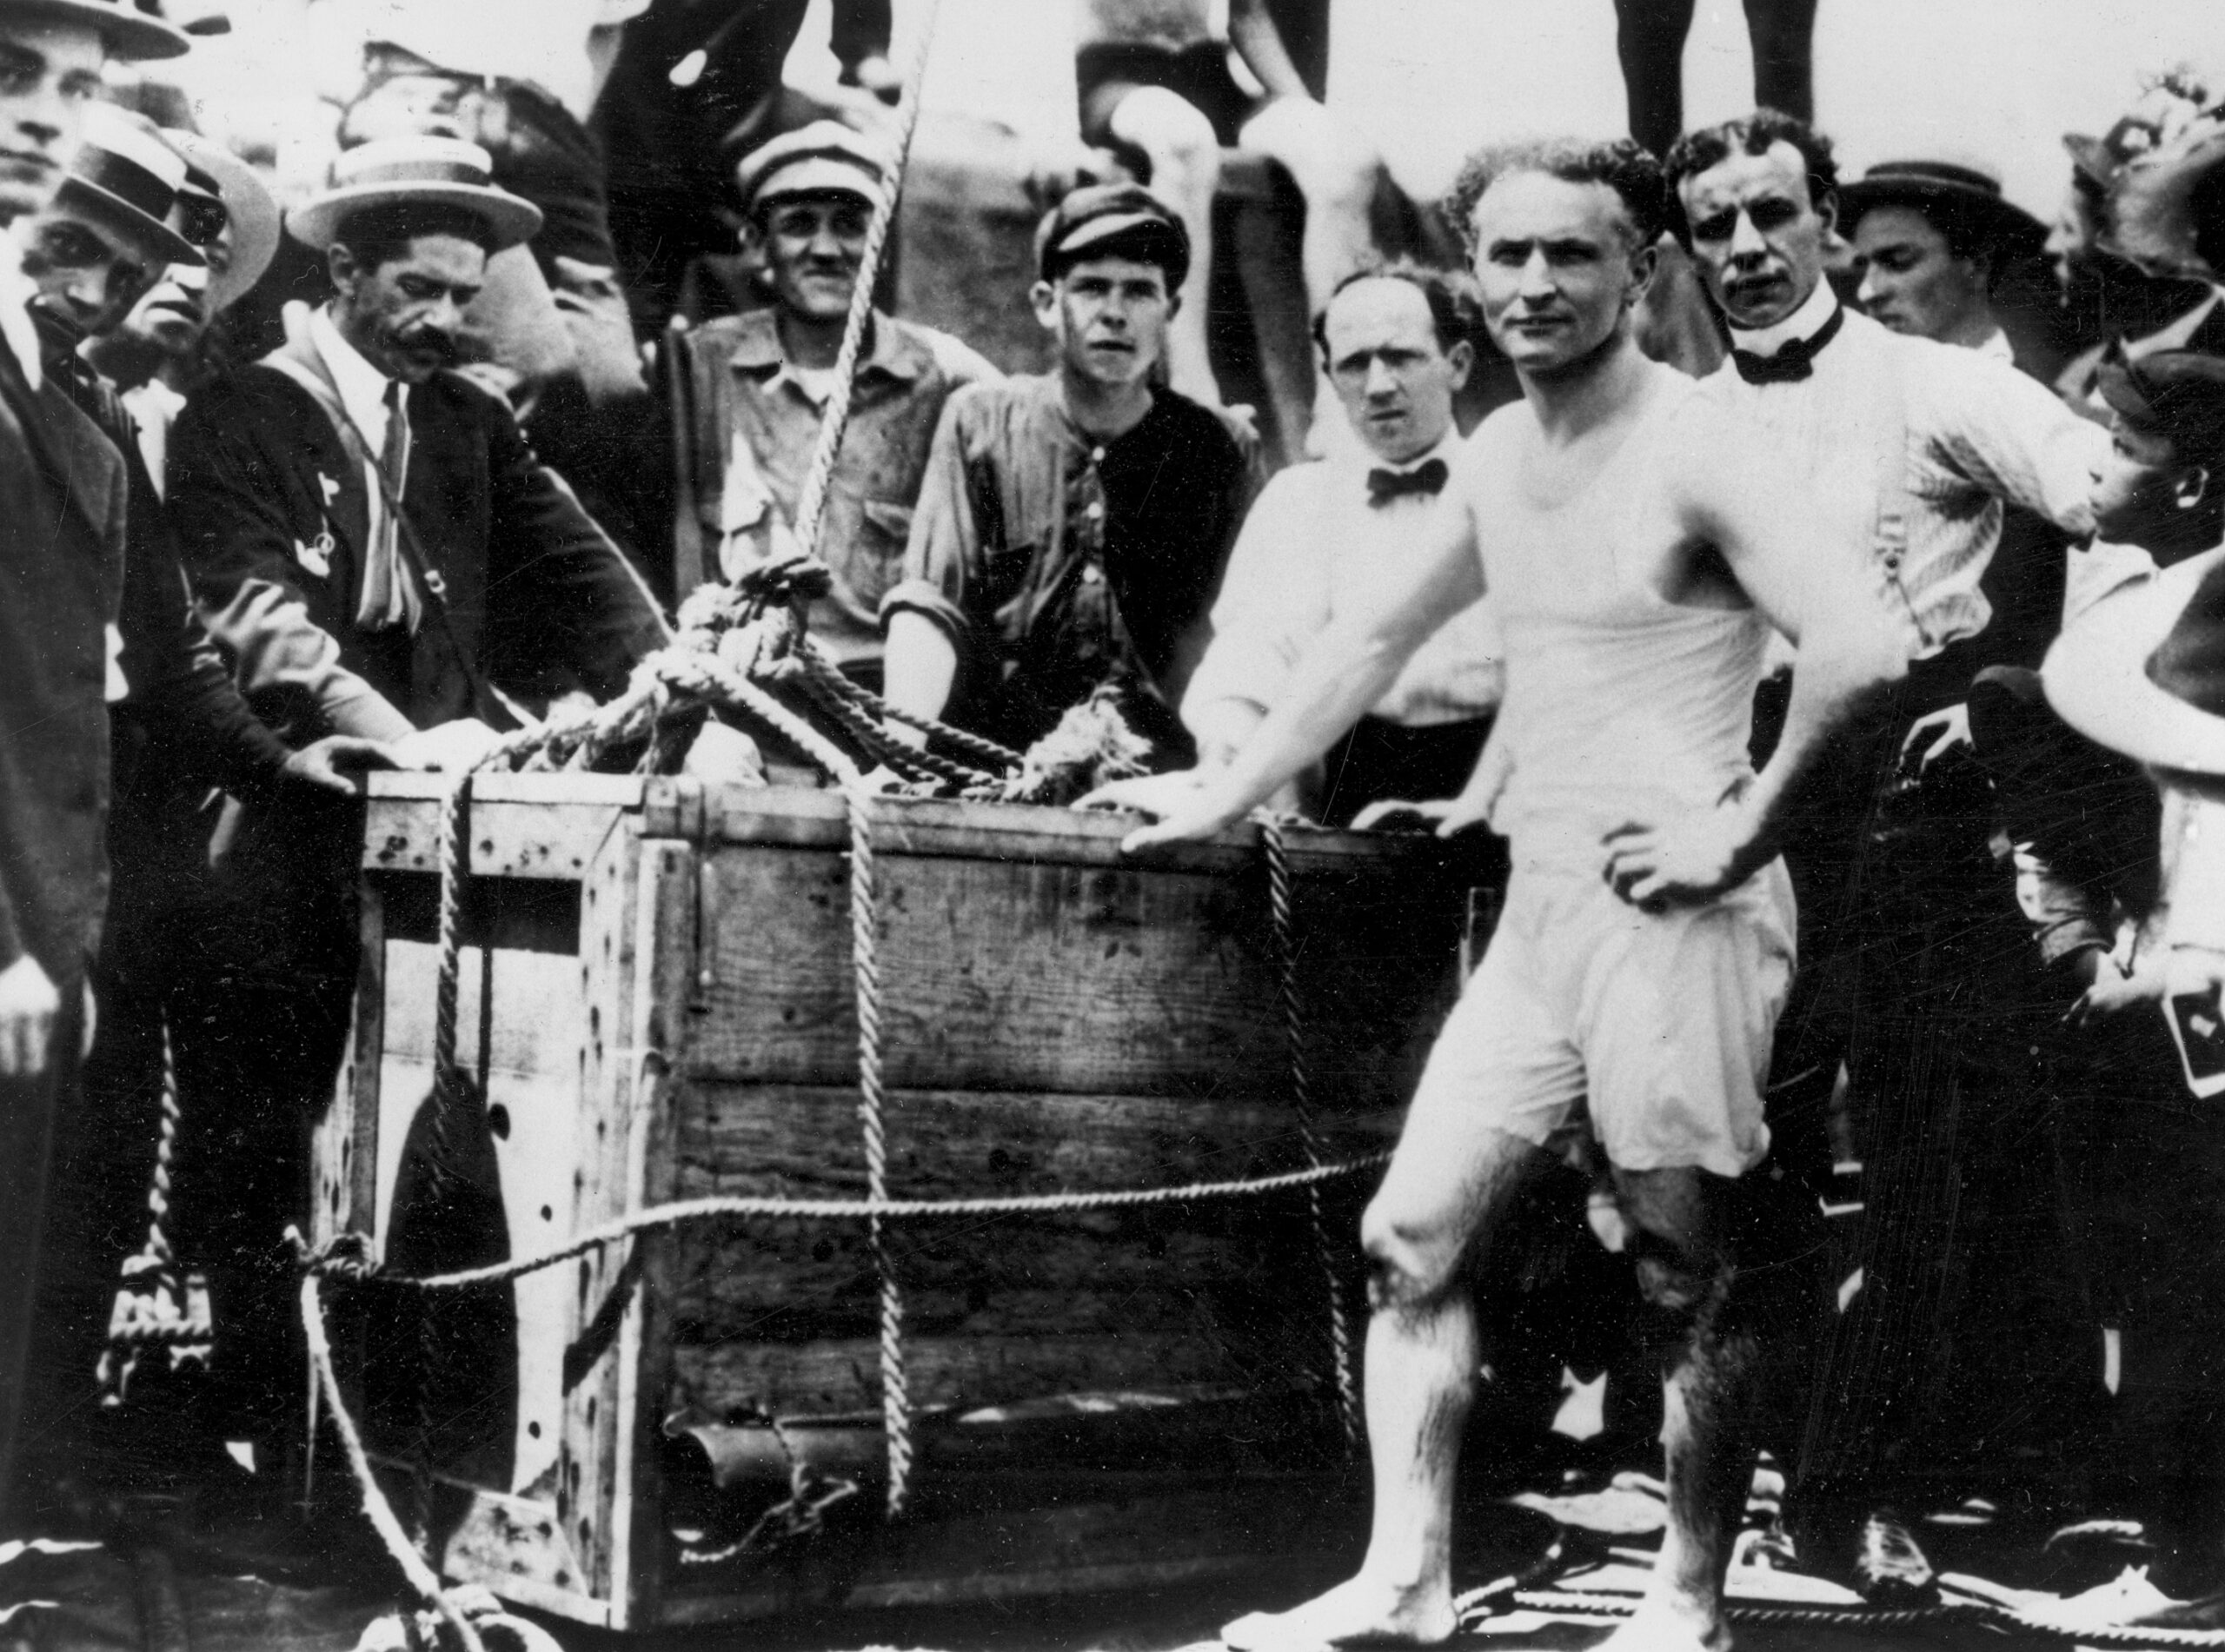 Harry Houdini before being lowered in a packing crate into the ice-covered Detroit River in 1907